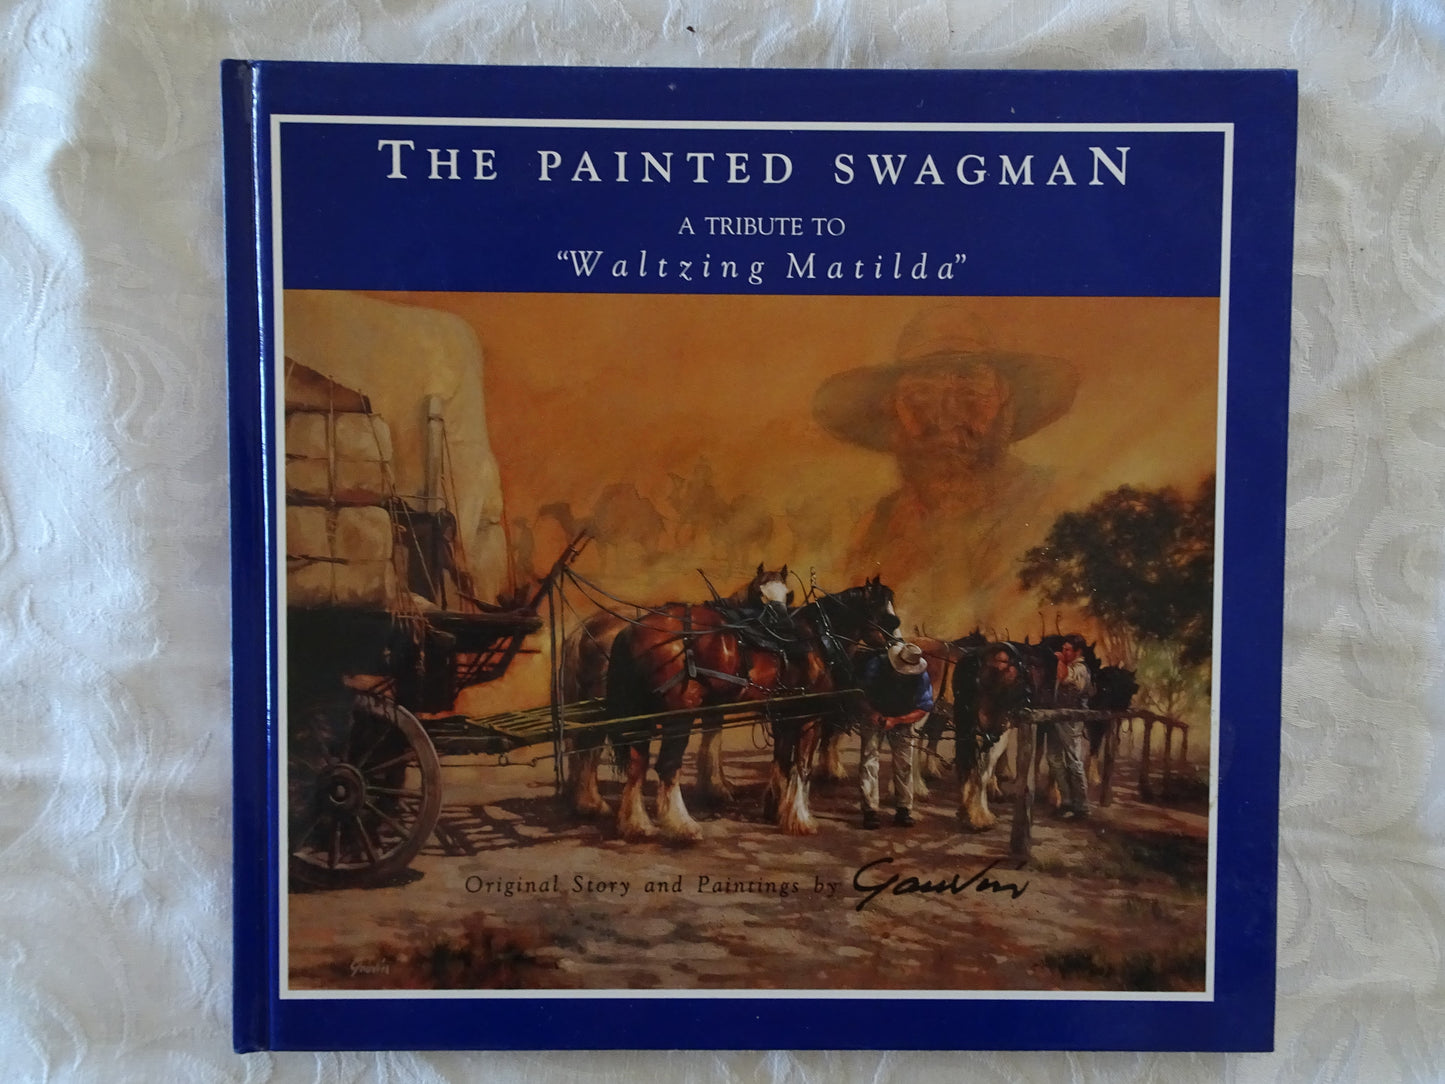 The Painted Swagman  A Tribute To "Waltzing Matilda"  Original Story and Paintings   by Dorothy Gauvin